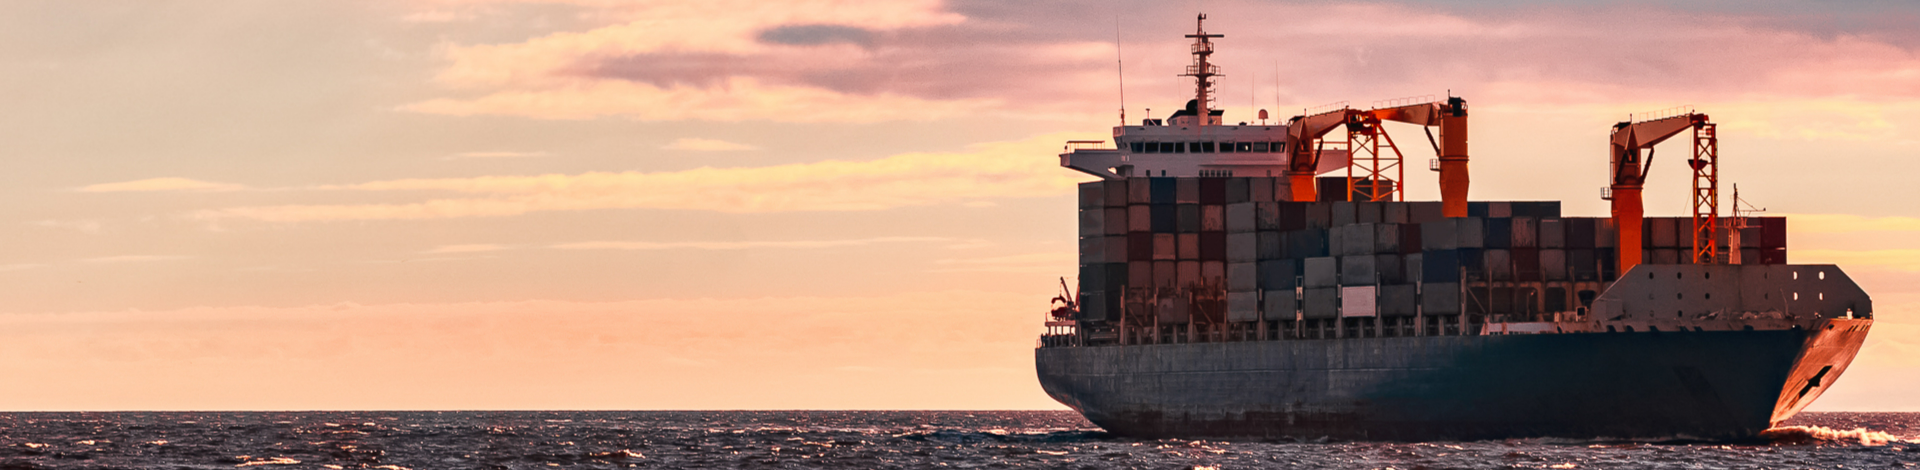 Large cargo ship with containers on board sailing on the ocean at sunset, highlighted with orange and pink hues in the sky and reflections on water.